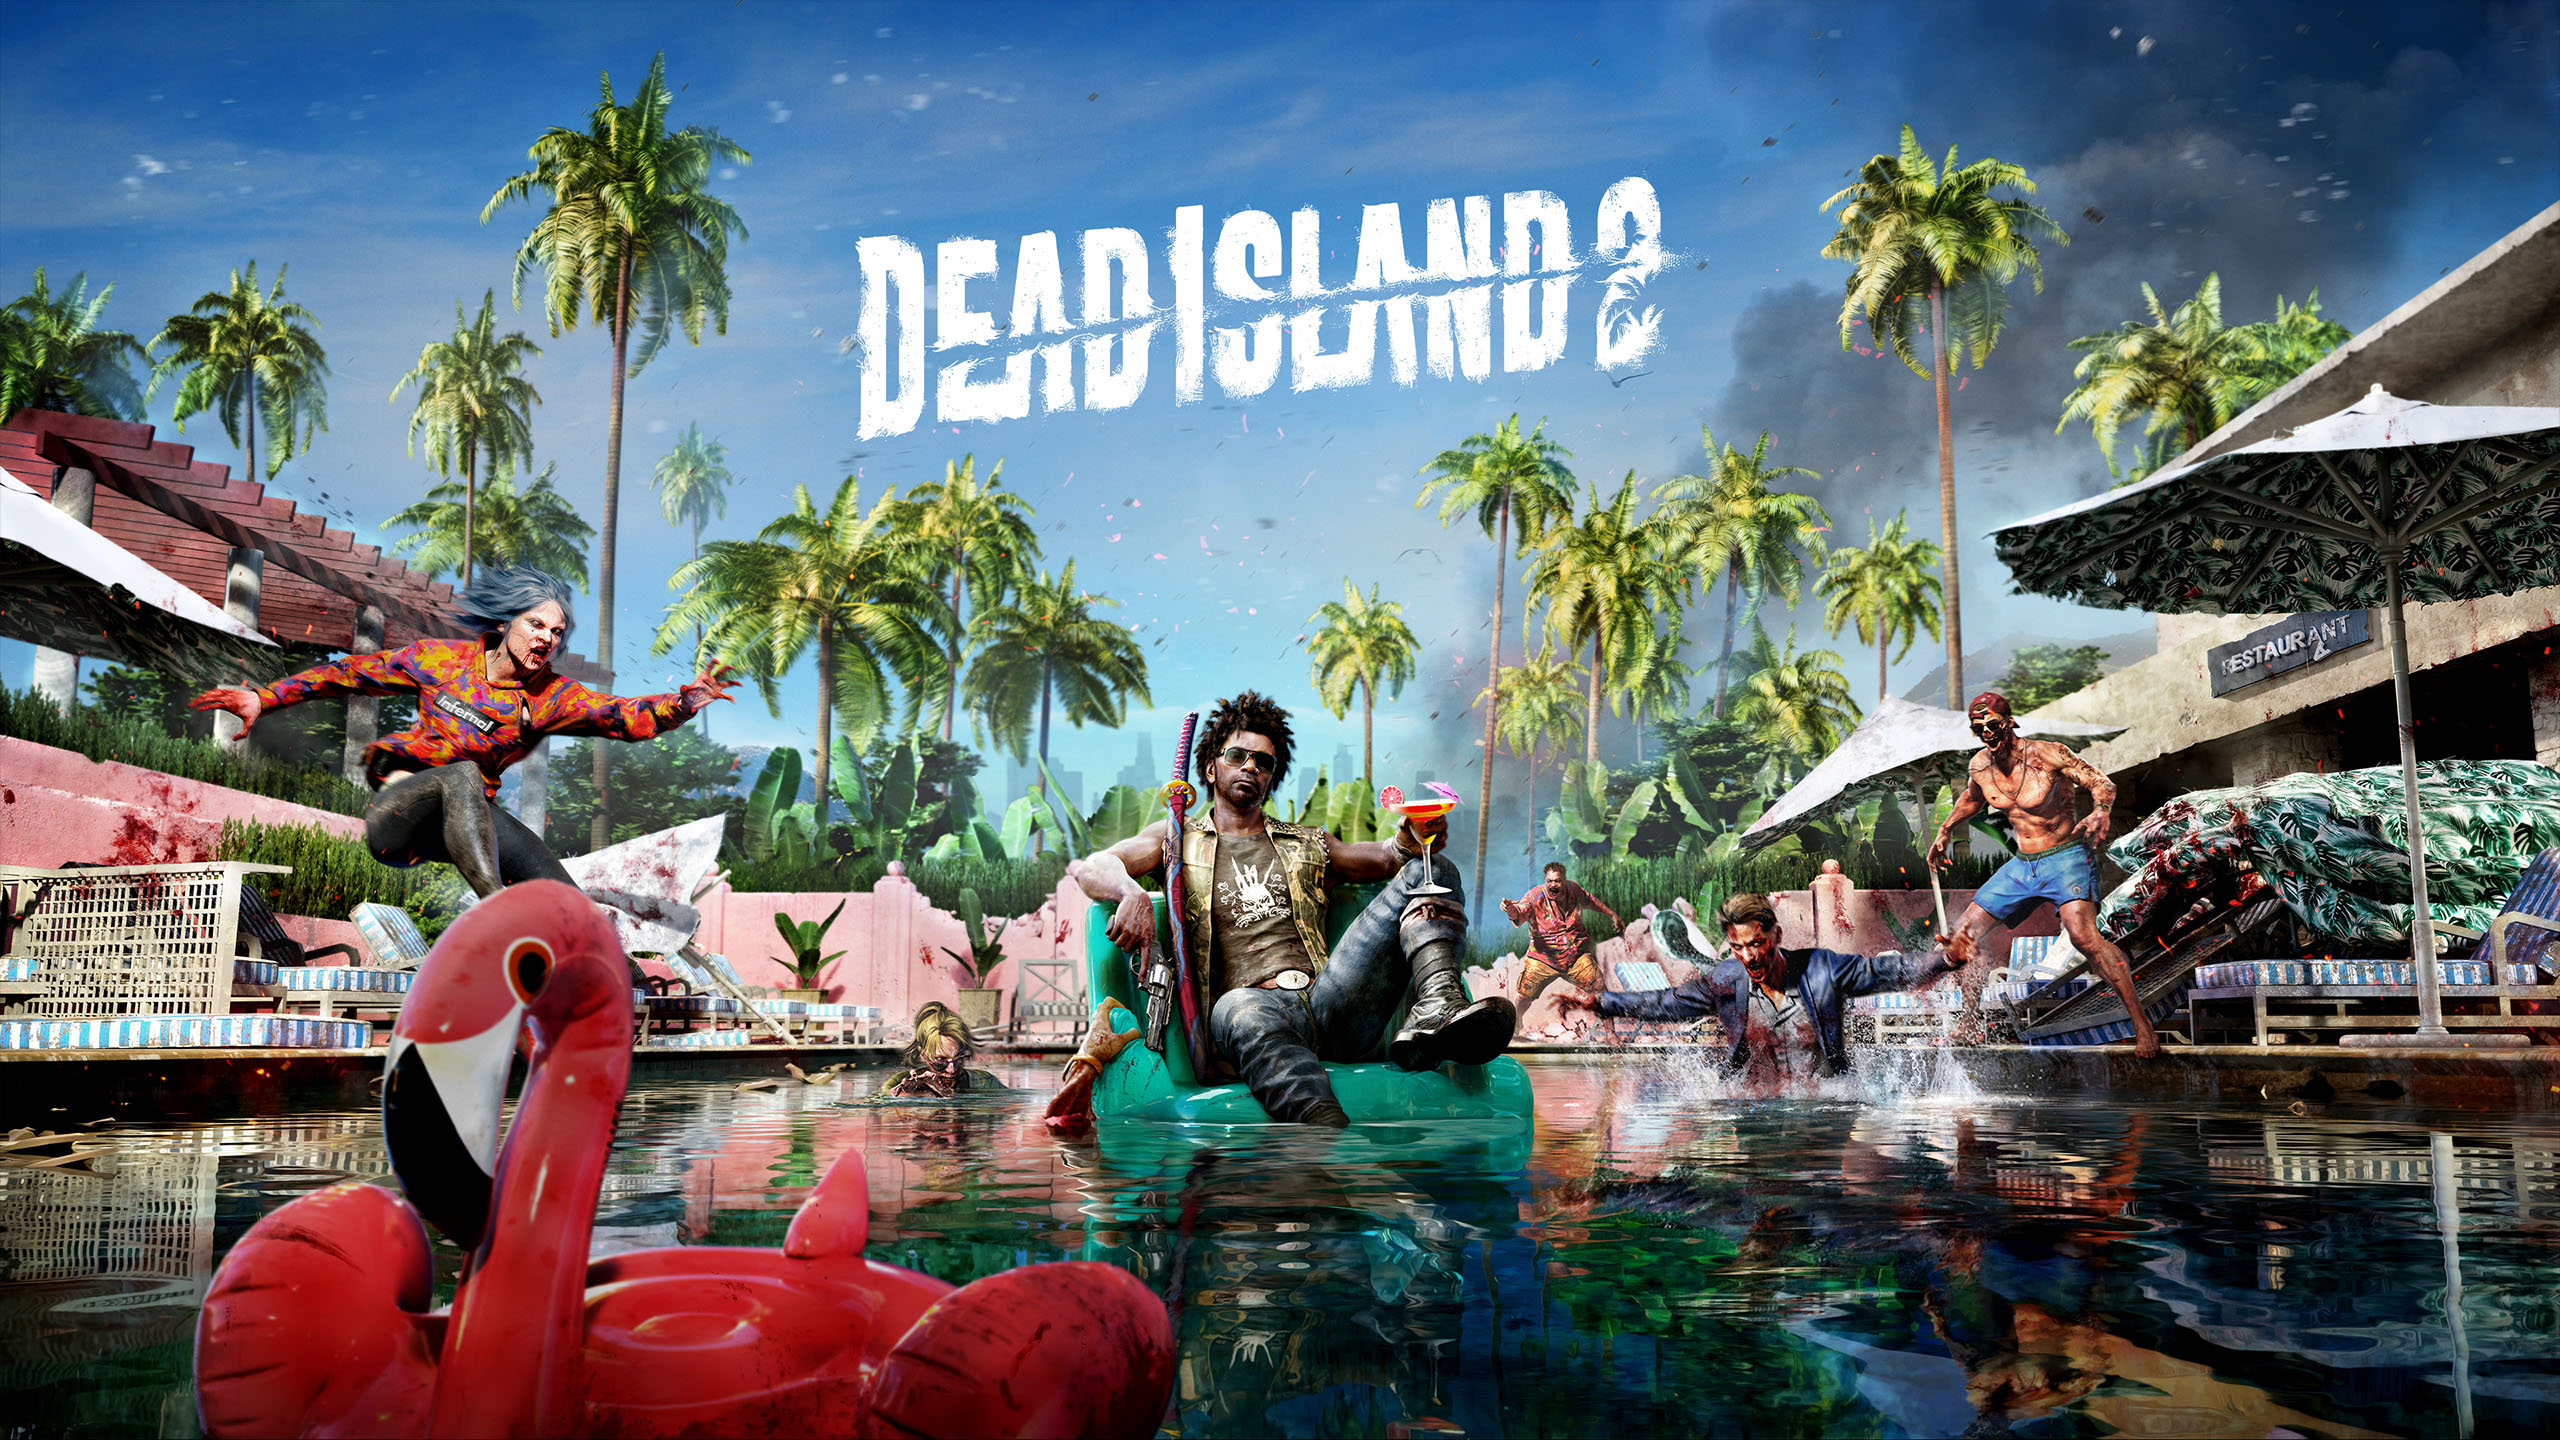 The number of copies of Dead Island 2 sold in three days crossed 1 million copies 